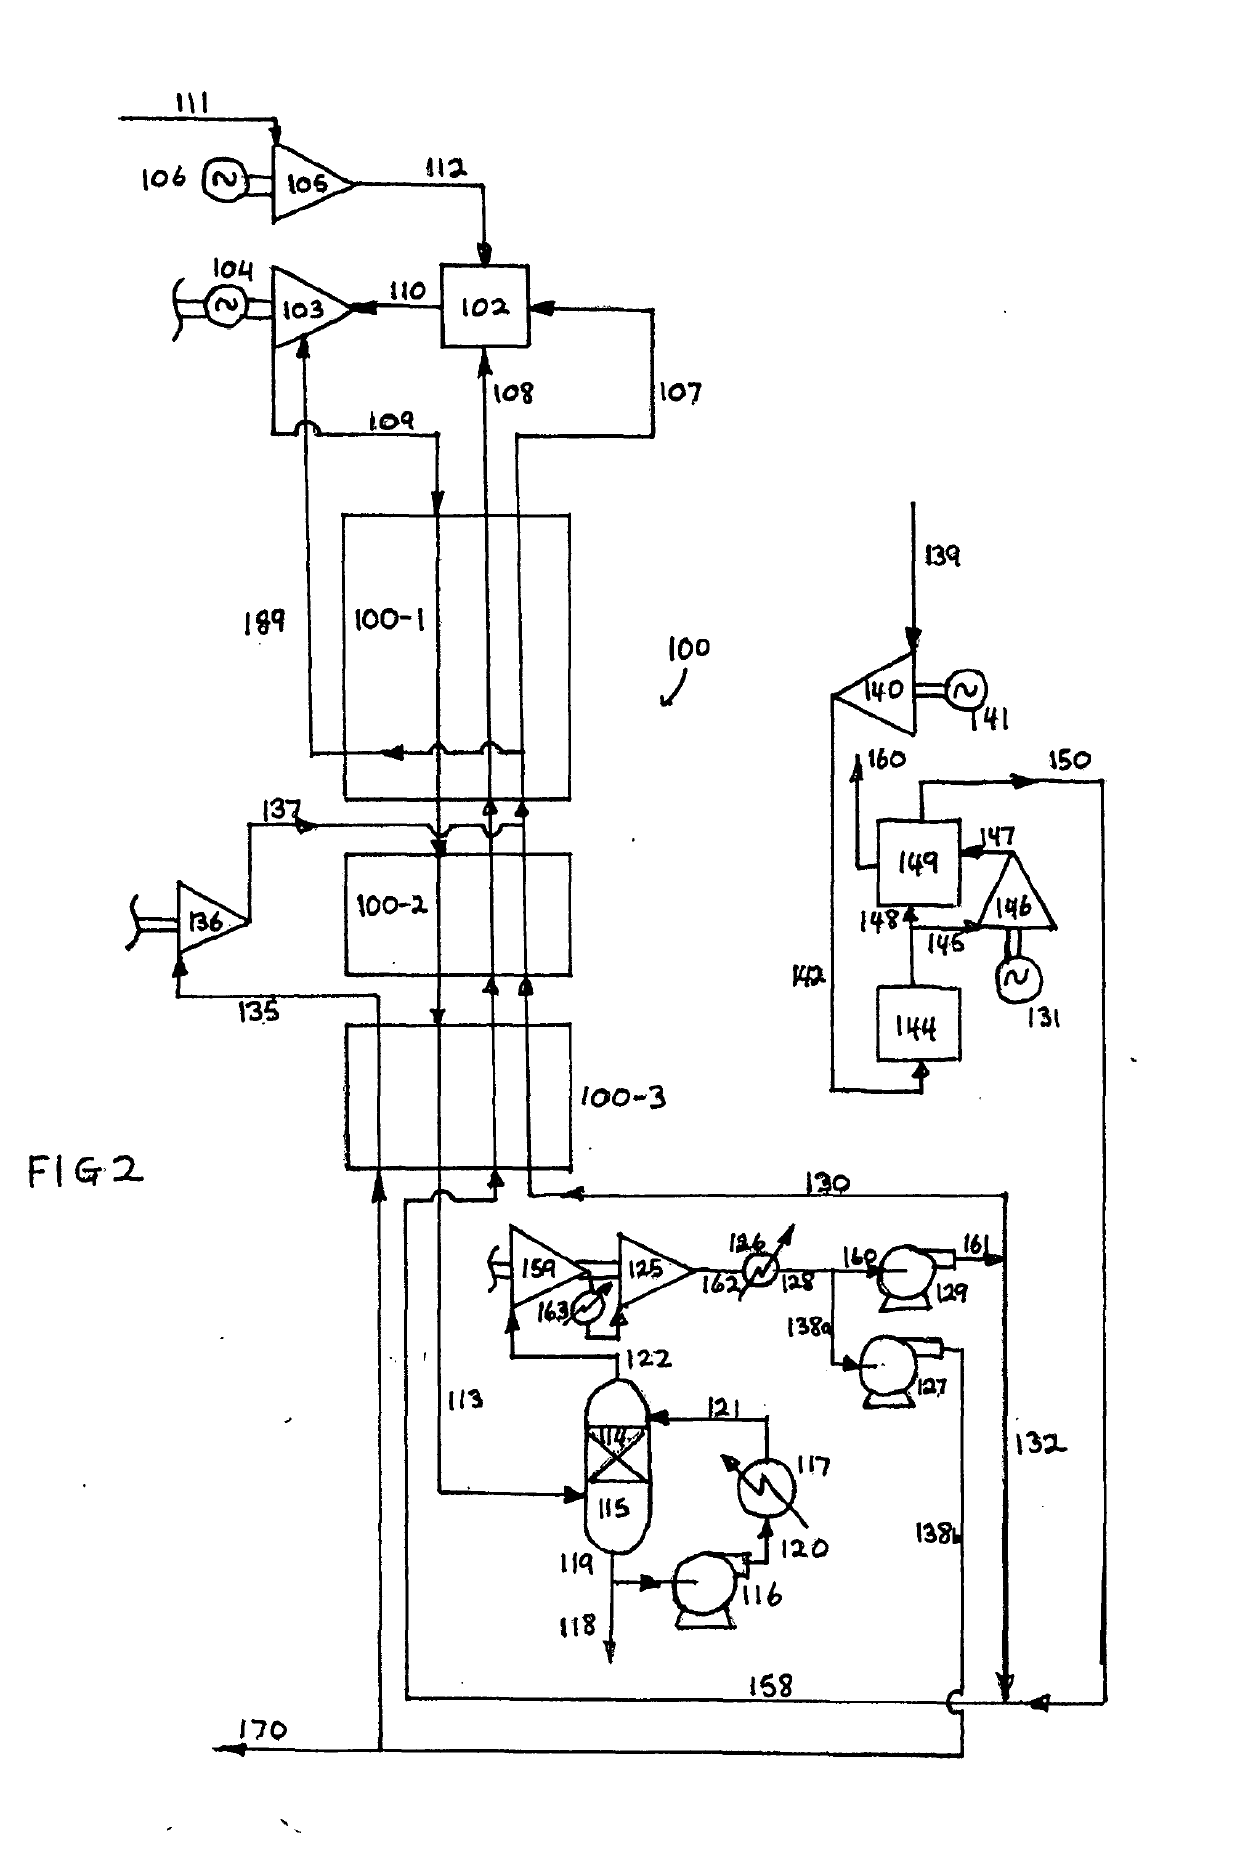 Systems and methods for power production using a carbon dioxide working fluid